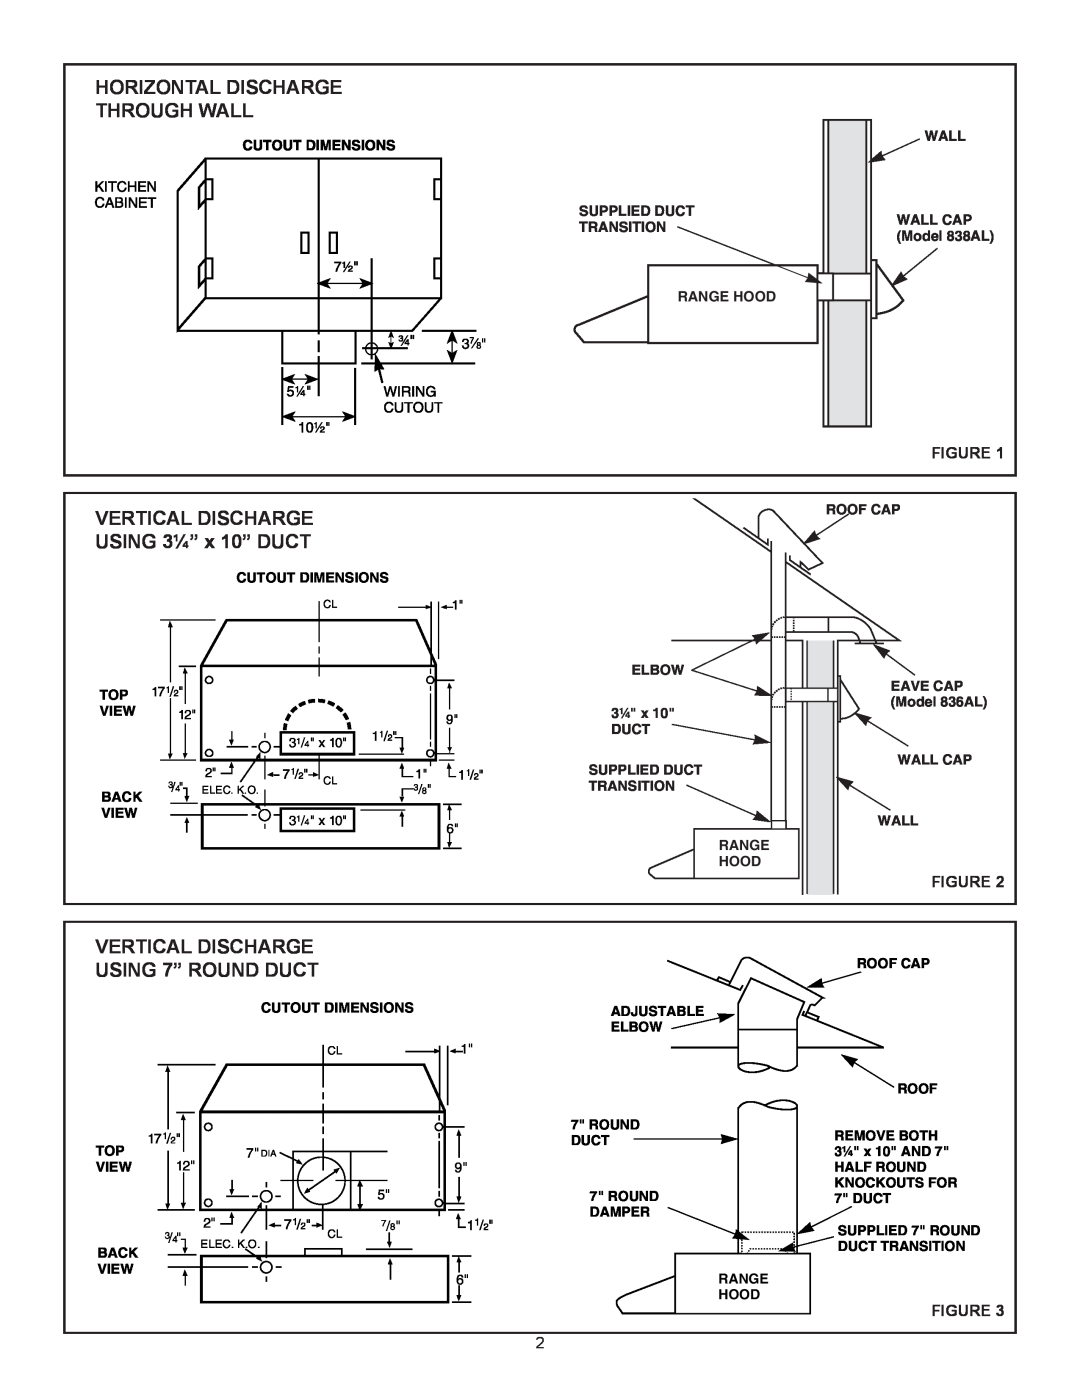 Broan Ql100 Series installation instructions Horizontal Discharge Through Wall, VERTICAL DISCHARGE USING 3¼” x 10” DUCT 